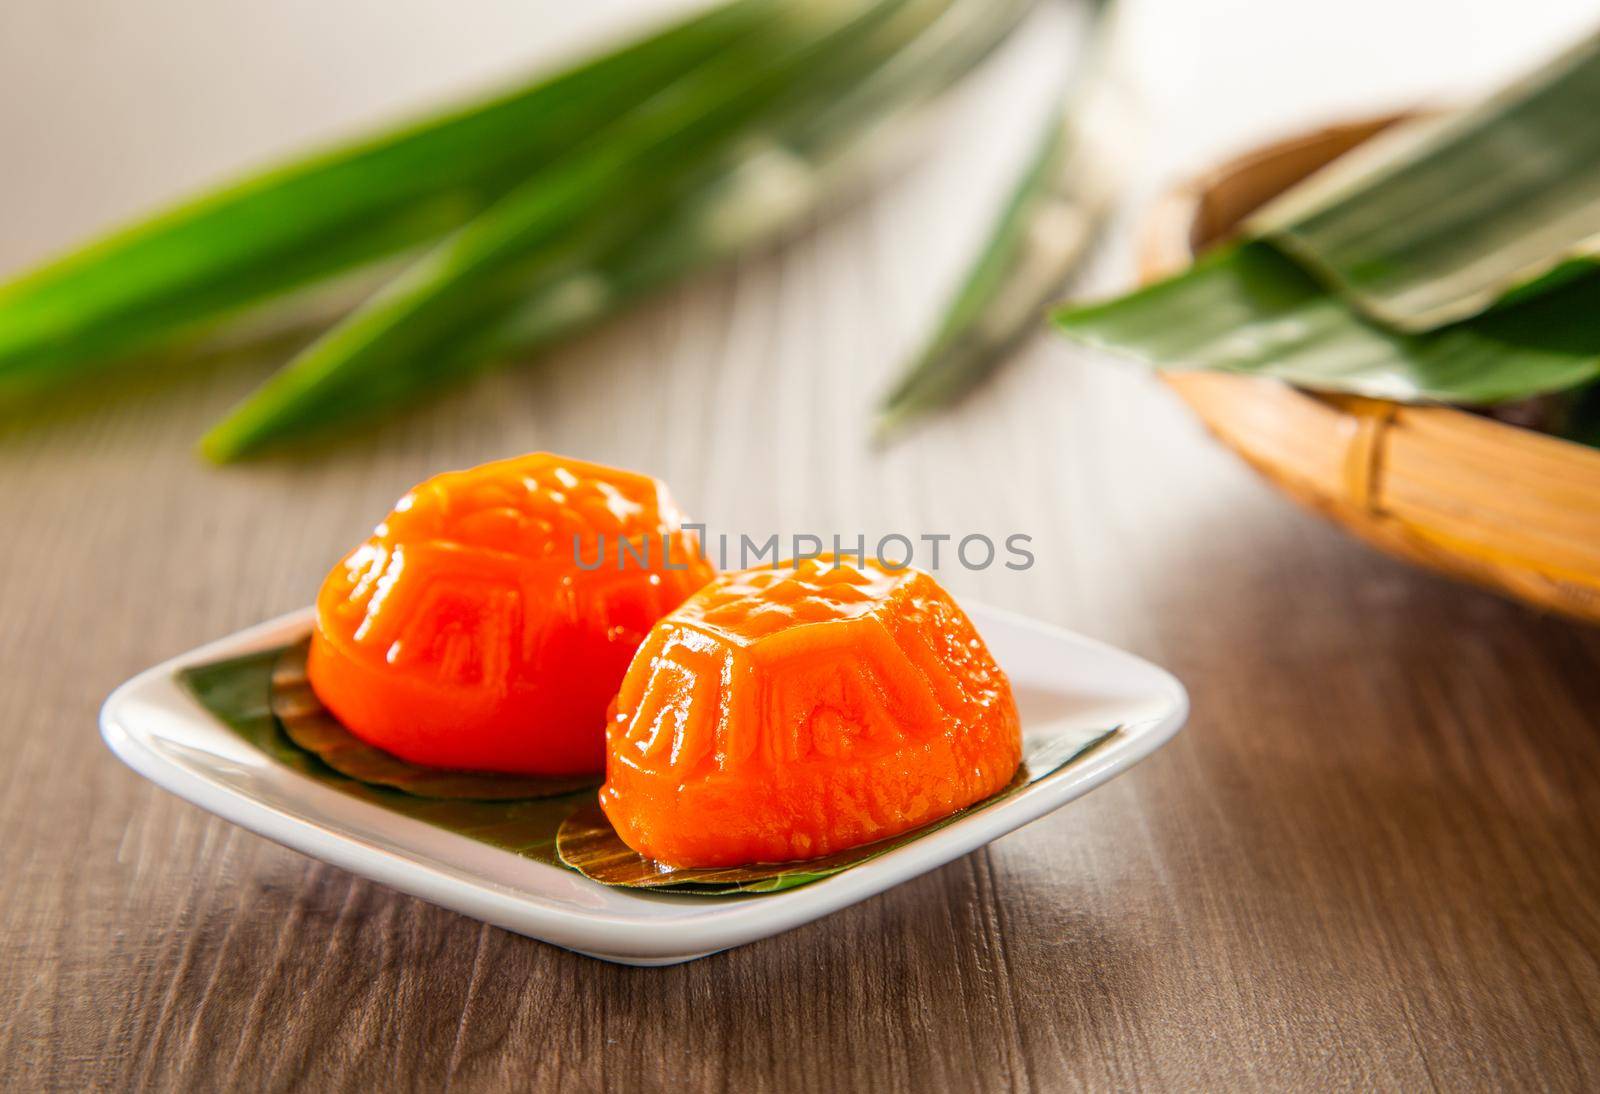 Asian Nyonya Food - kuih angku (Red Tortoise Cake traditional cake made of glutinous rice flour with red bean paste filling) by tehcheesiong